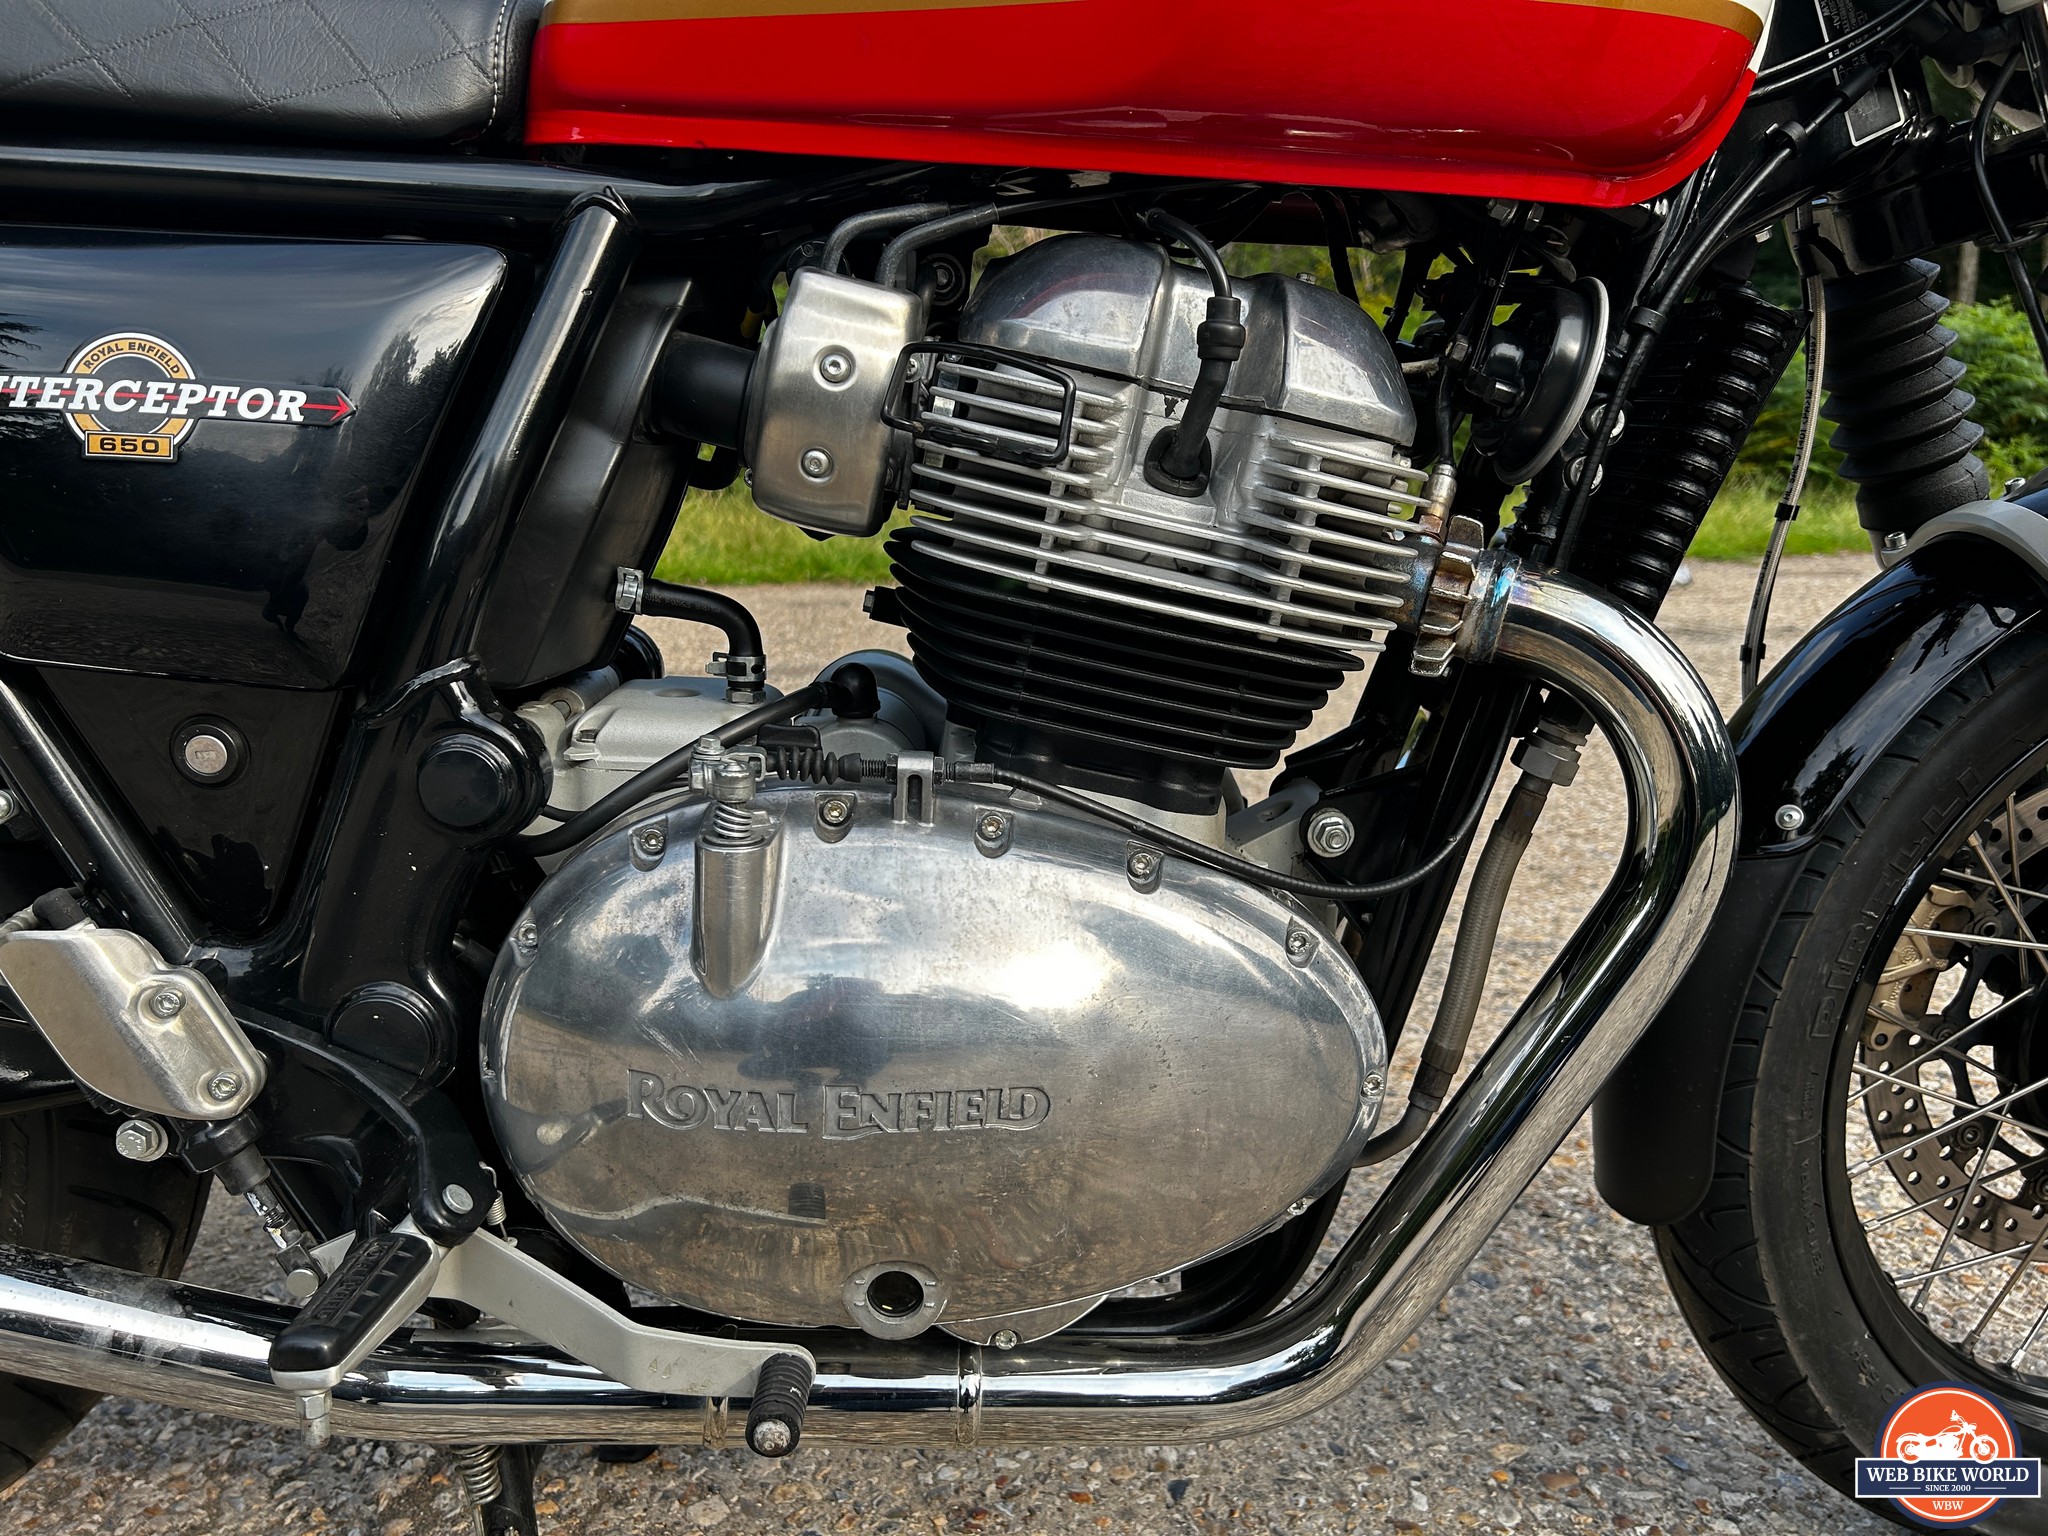 Closeup of the 648cc engine on the Royal Enfield Interceptor 650